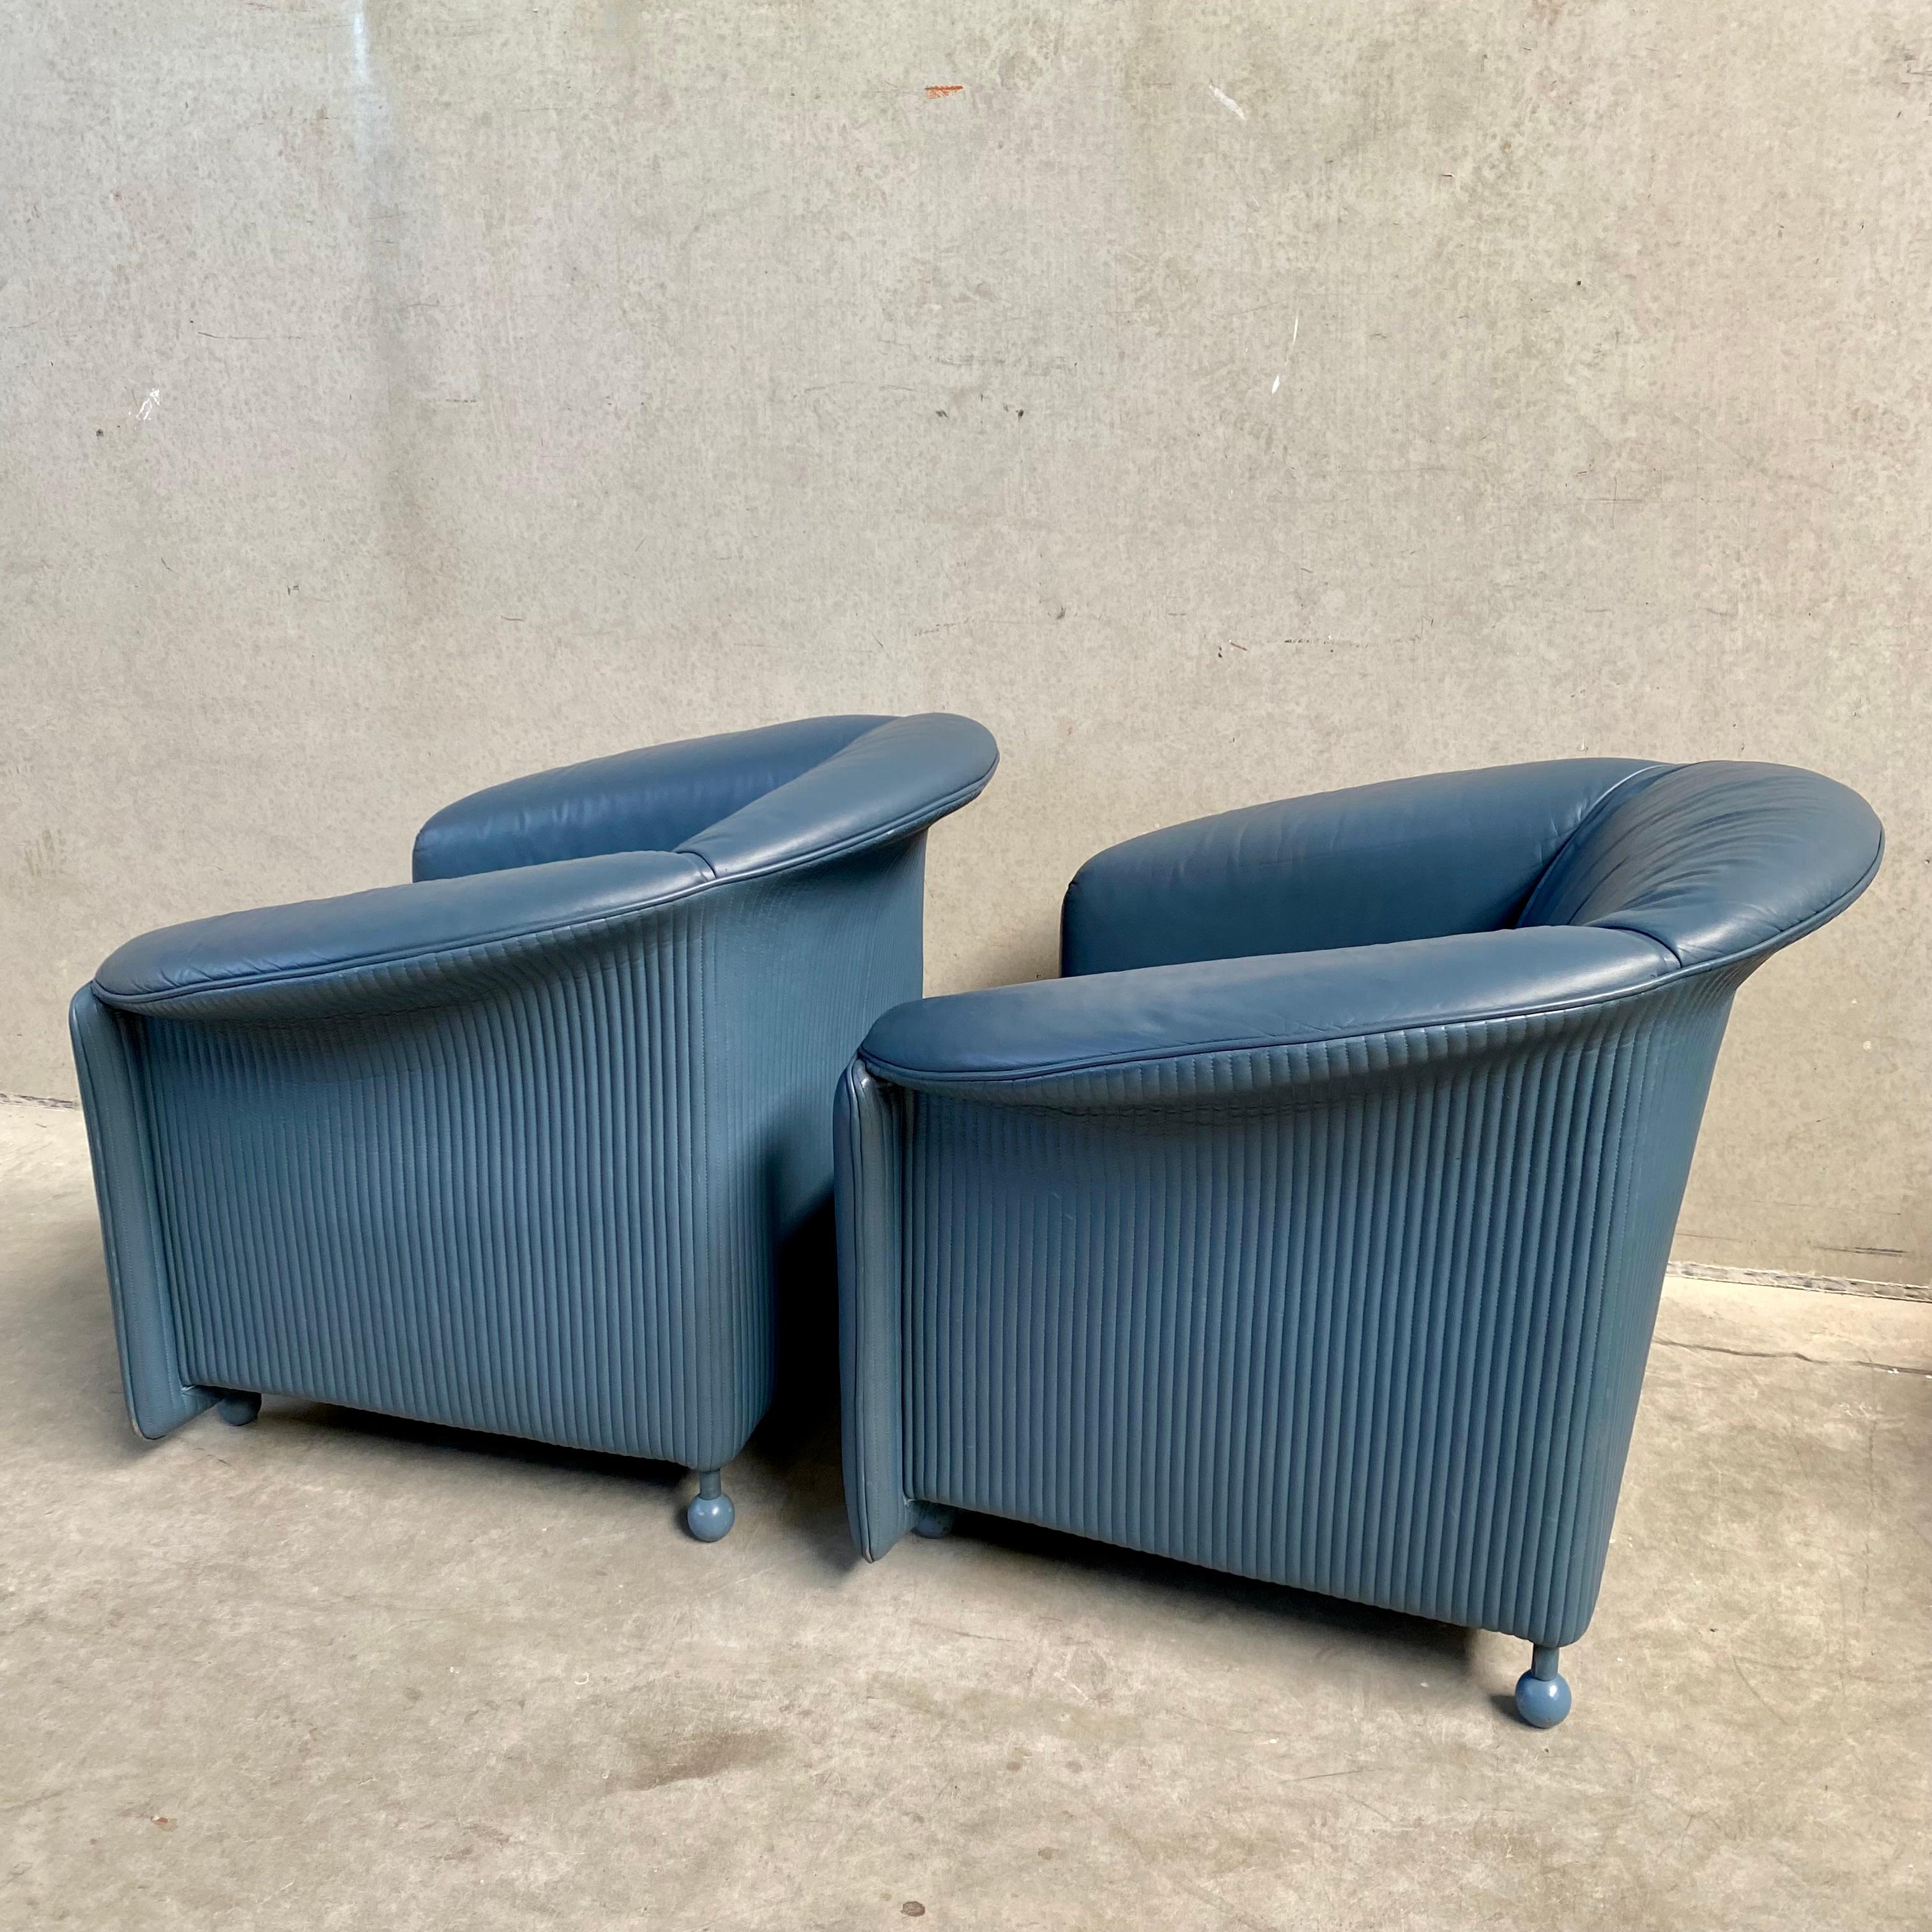 Set of 2 Vintage Leather Arm Chairs by Paolo Piva for Wittmann, Austria 1980s For Sale 3